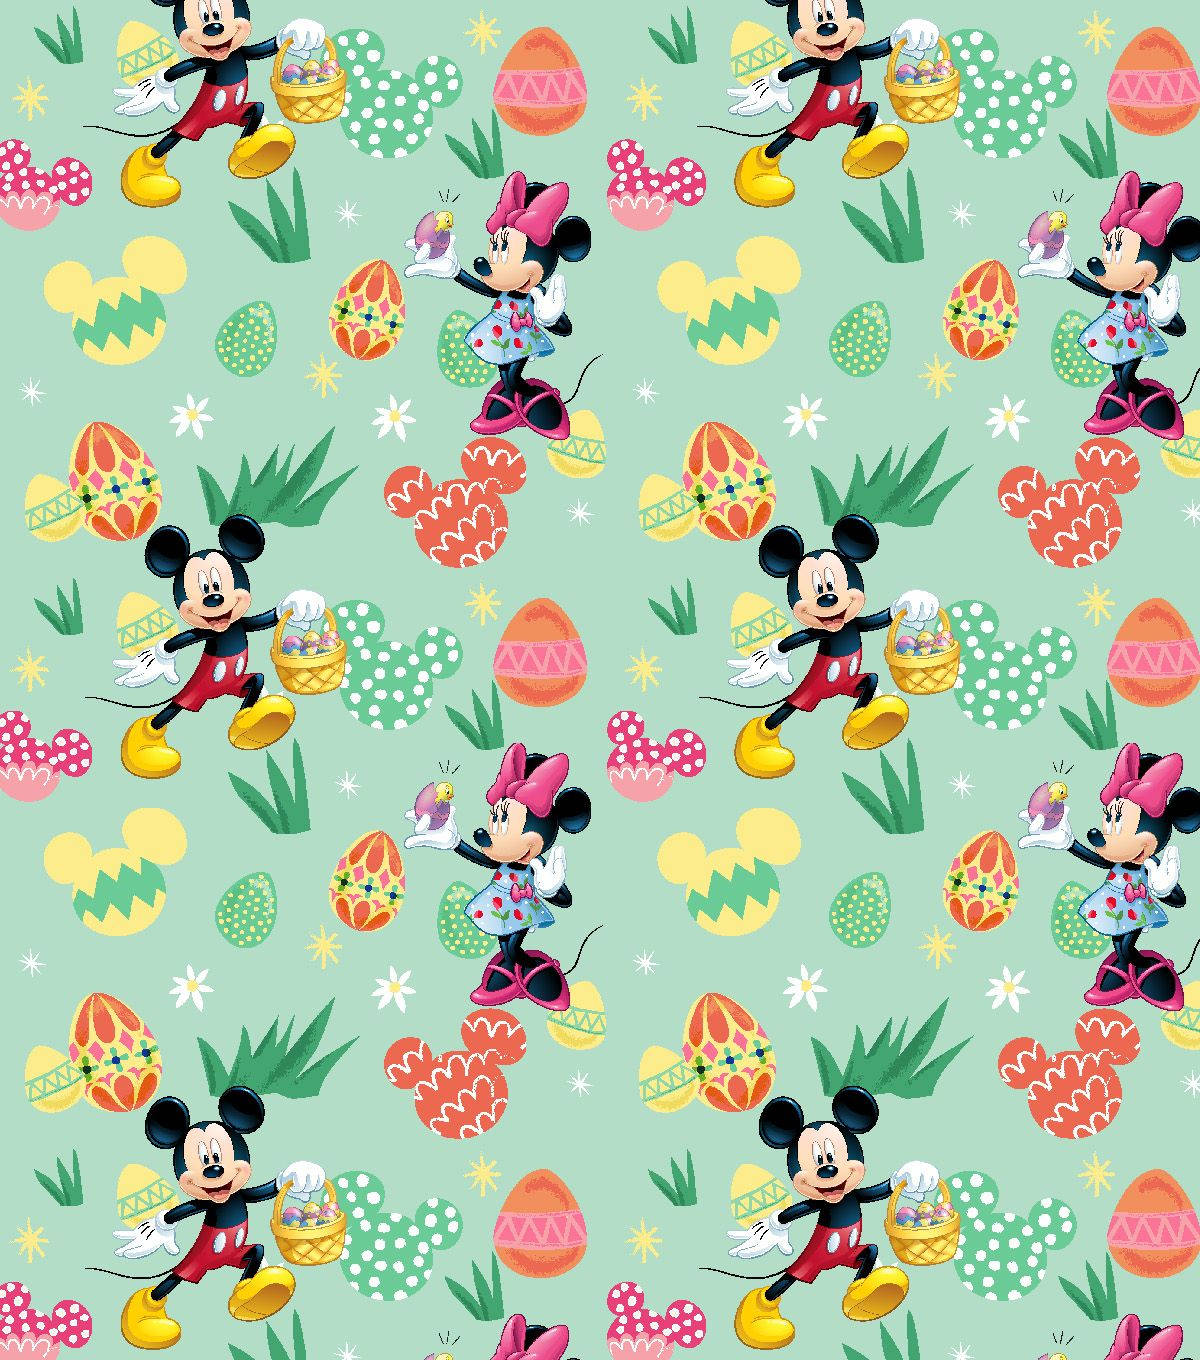 Celebrate Easter with an aesthetic twist! Wallpaper